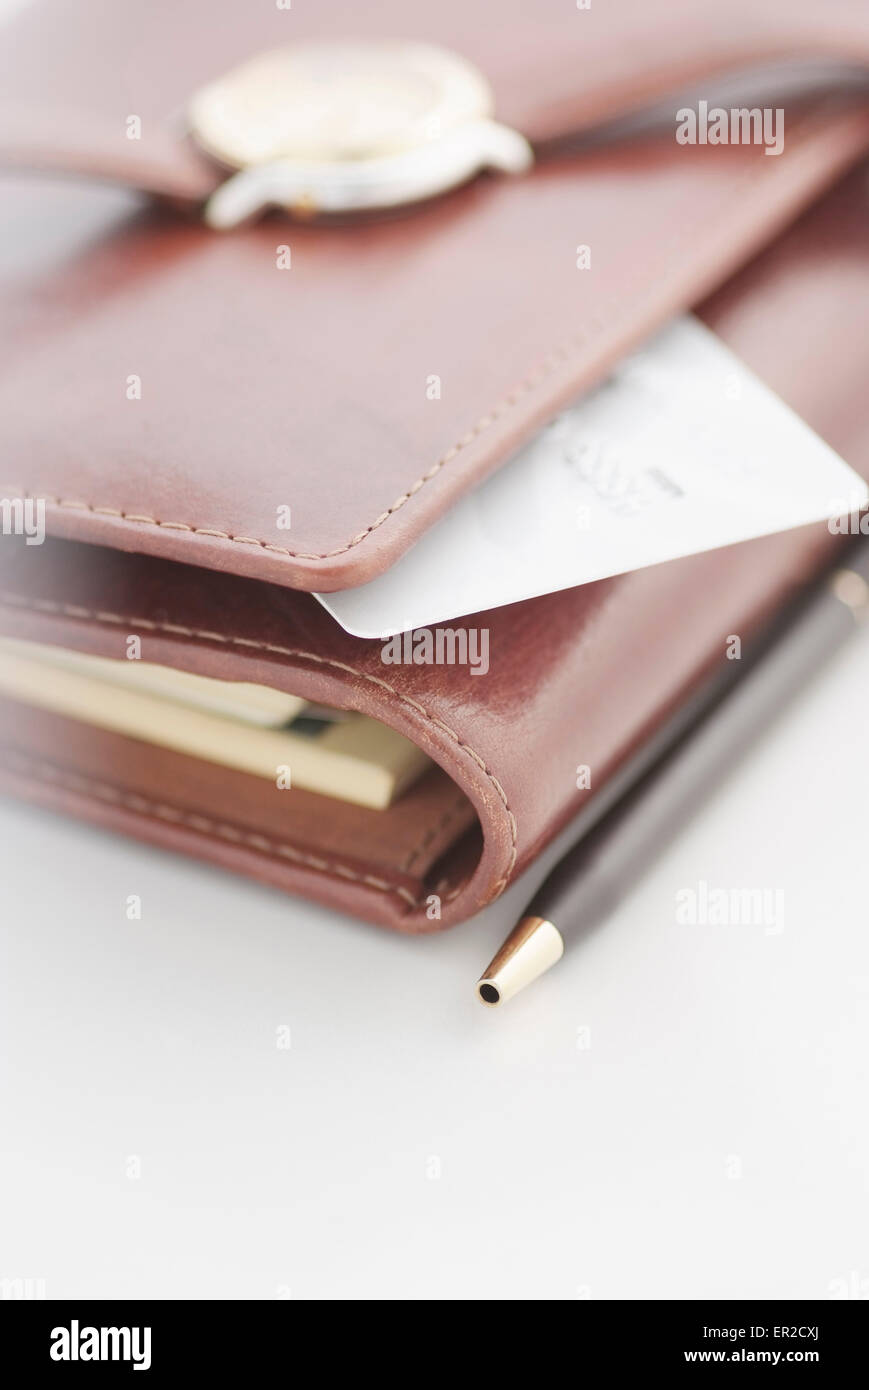 Credit card, pen and a watch on an agenda Stock Photo